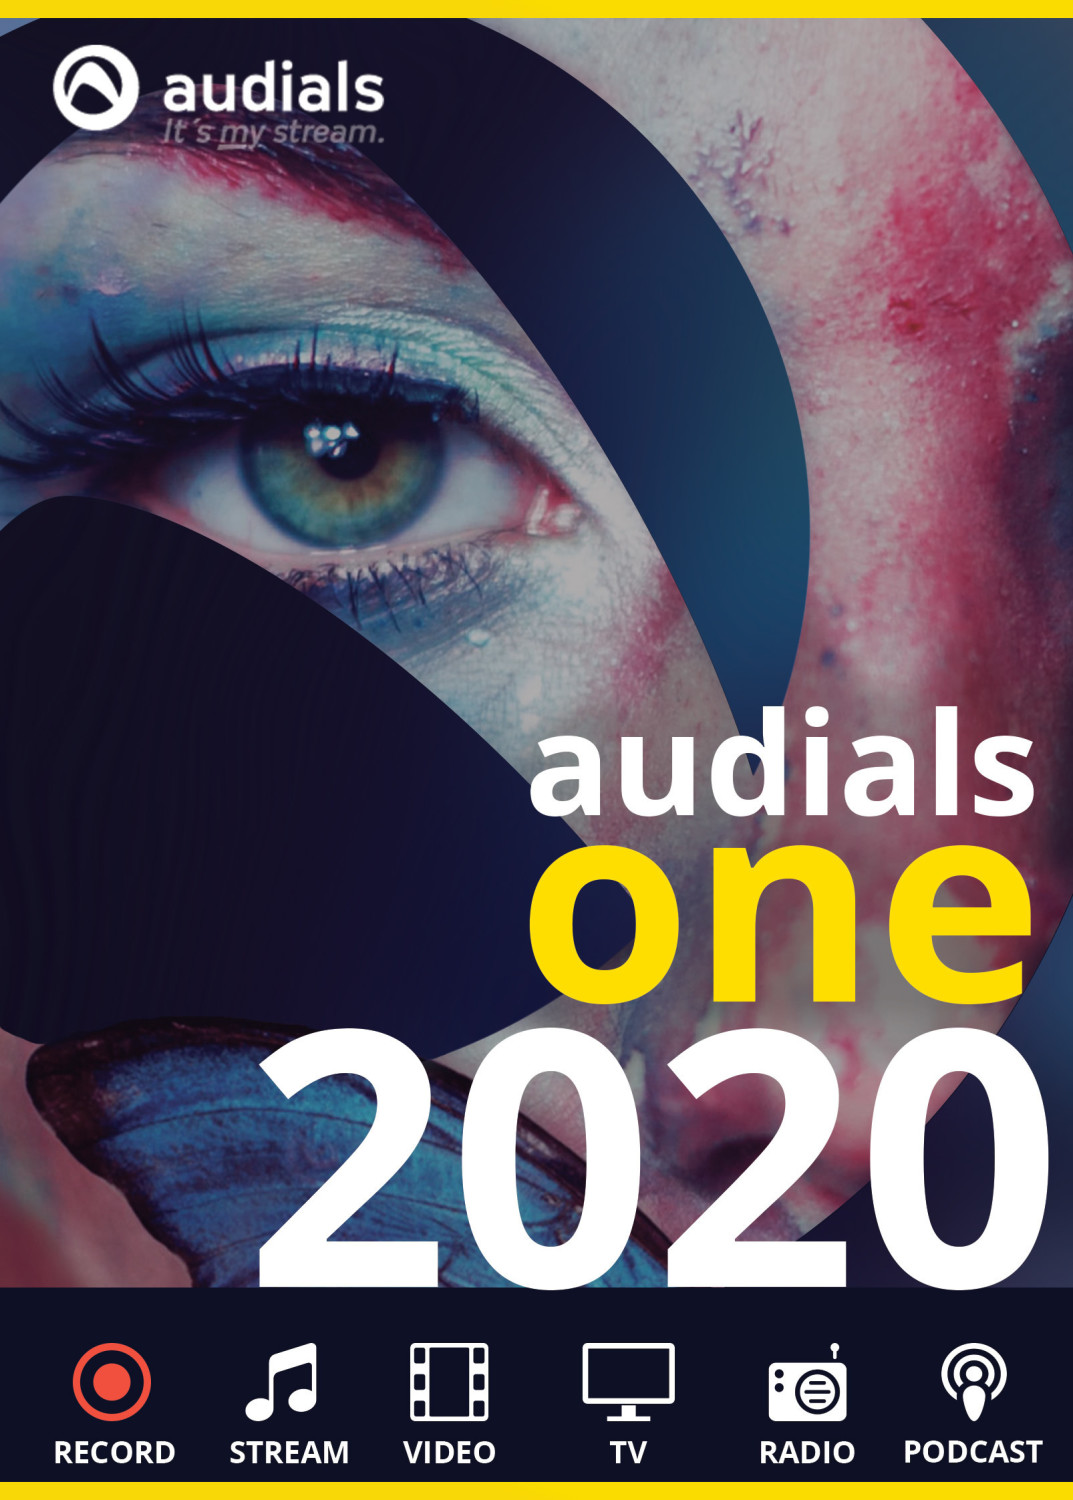 audials one 2019 logos